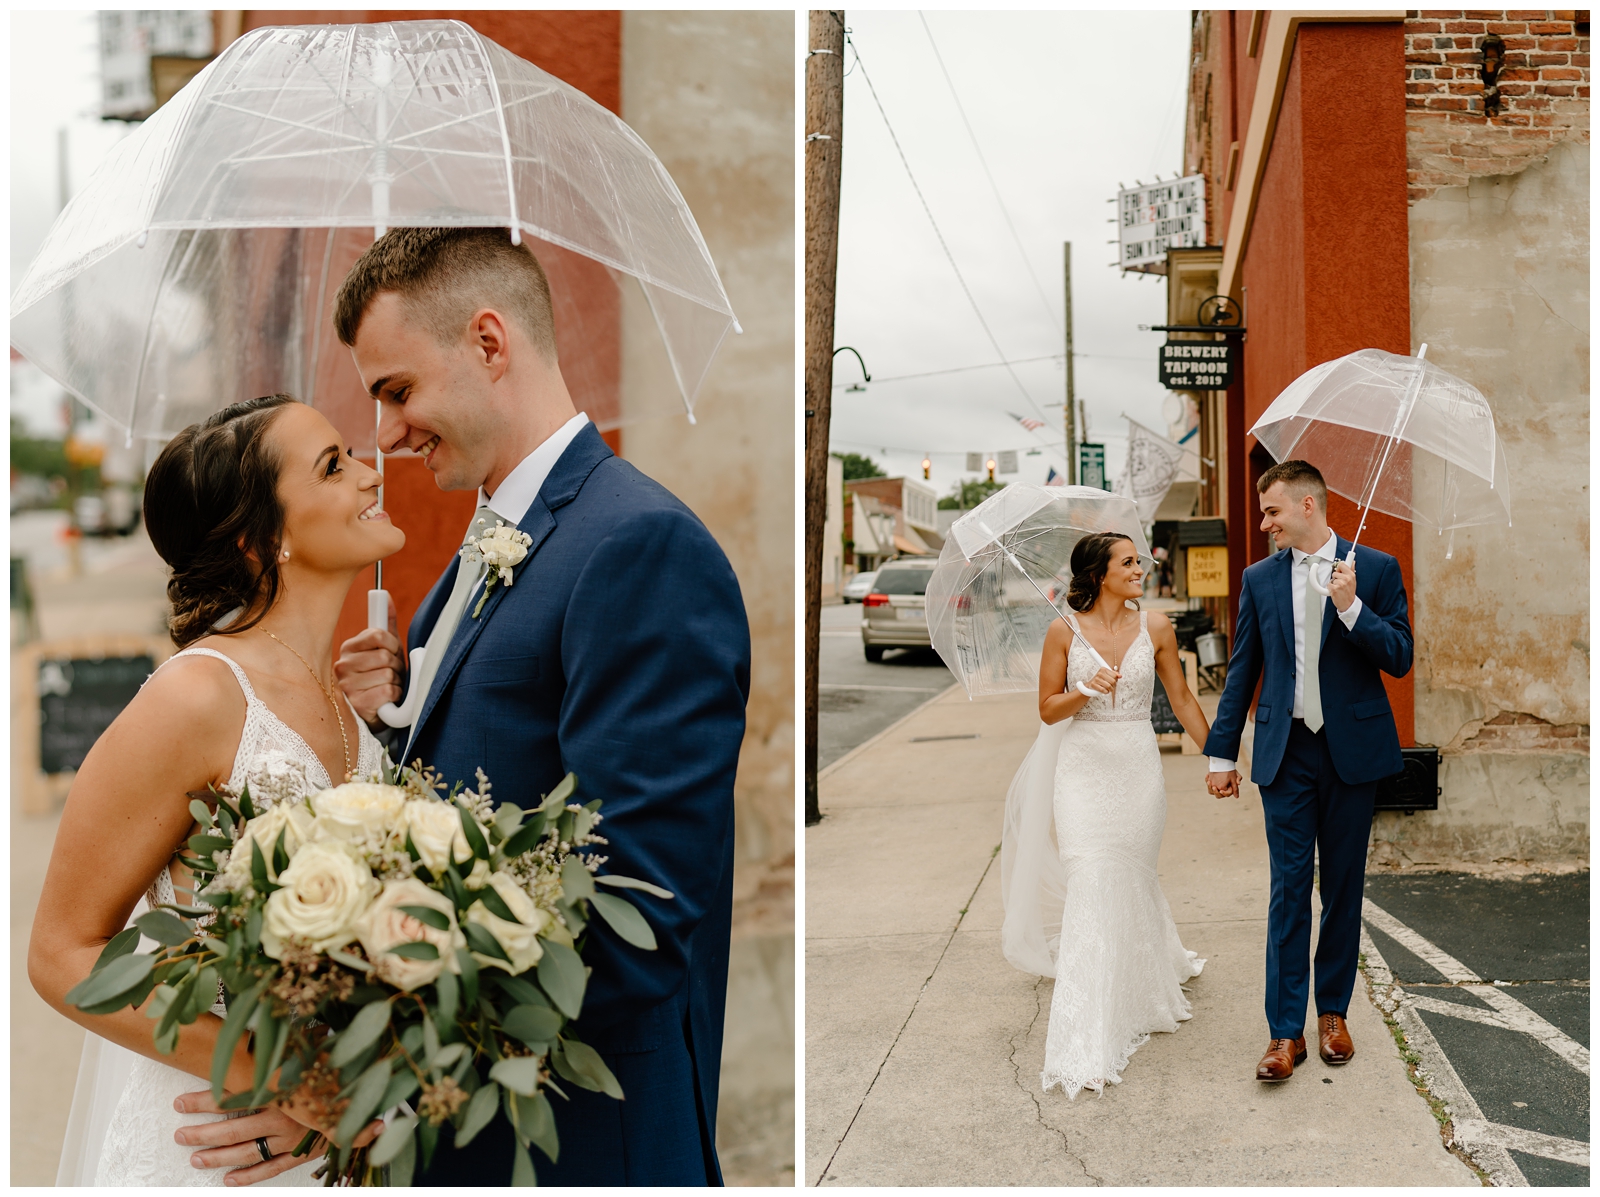 Cute rainy wedding day portraits with clear umbrellas, couple walking down street holding hands by Winston-Salem, NC photographer